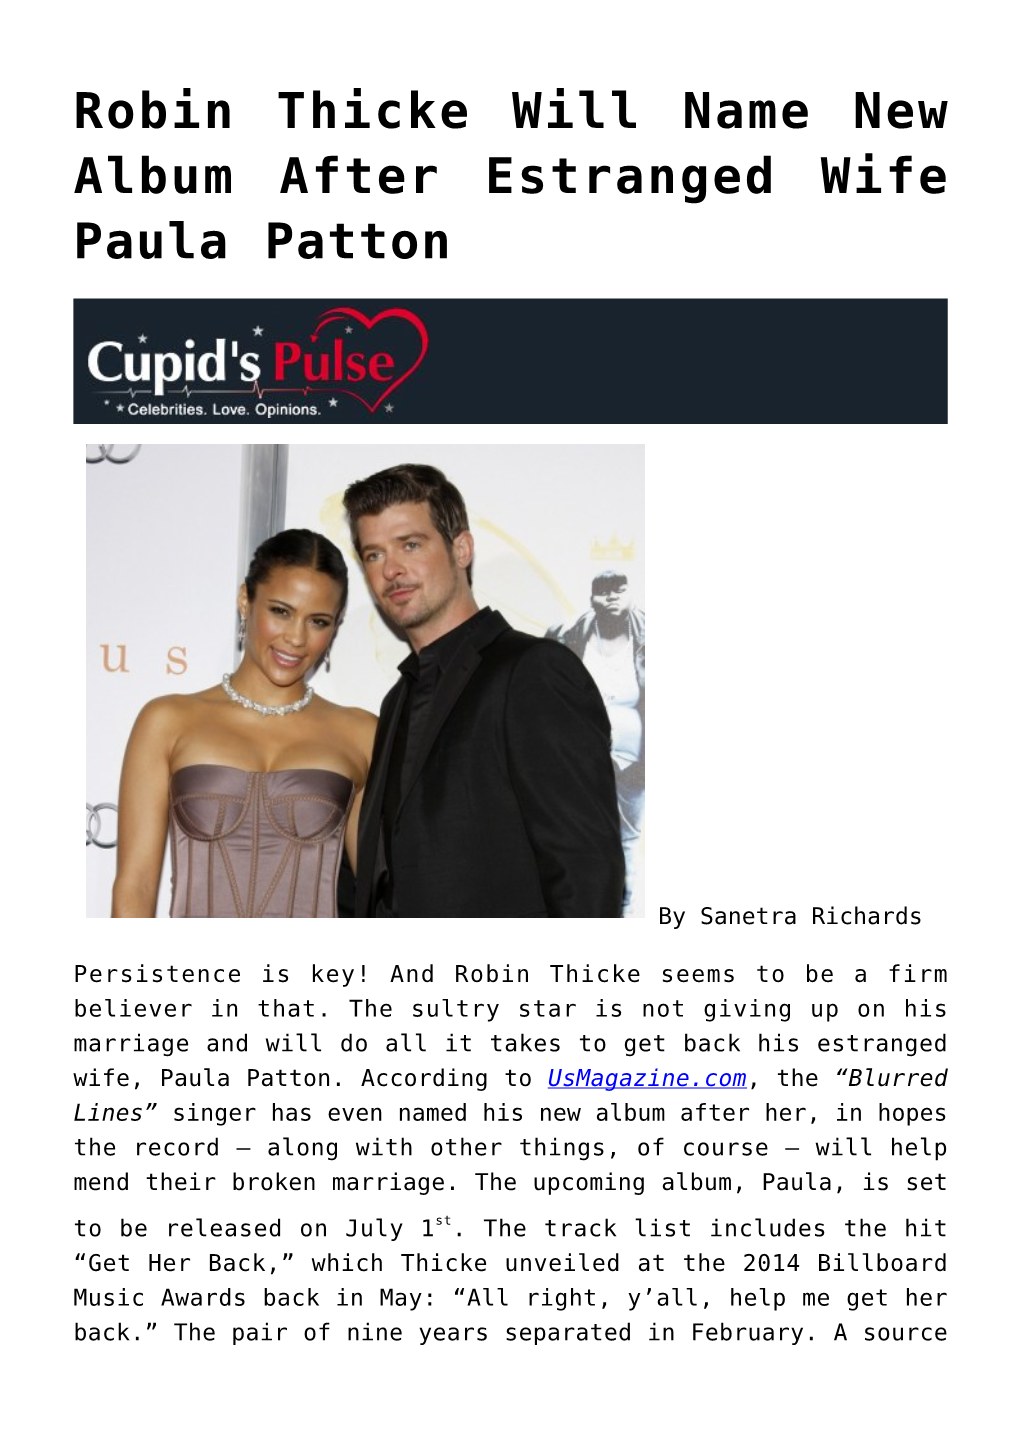 Robin Thicke Will Name New Album After Estranged Wife Paula Patton